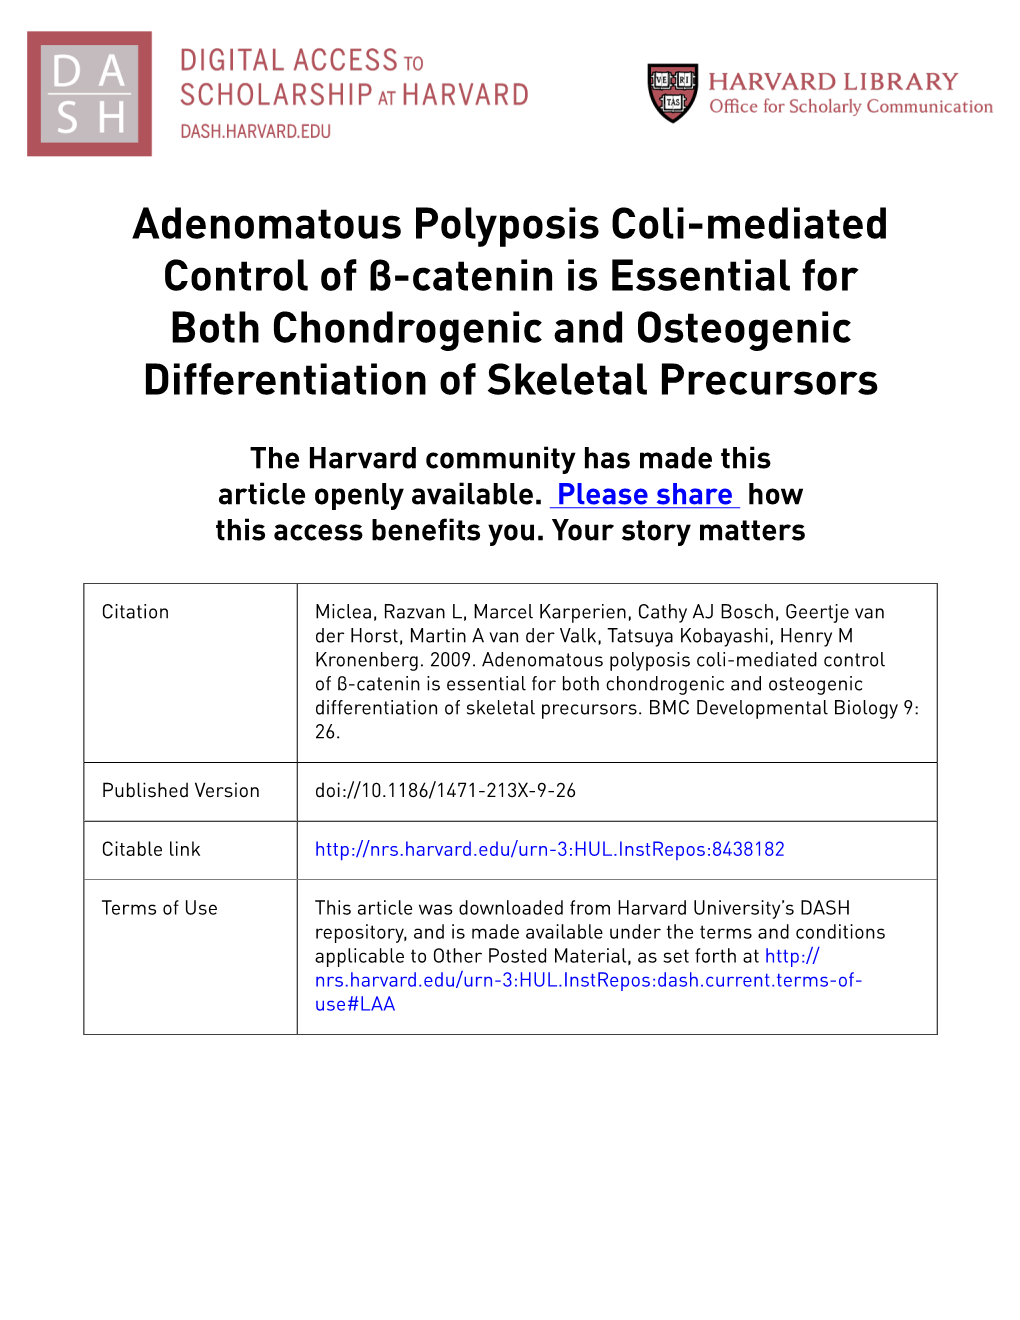 Adenomatous Polyposis Coli-Mediated Control of Β-Catenin Is Essential for Both Chondrogenic and Osteogenic Differentiation of Skeletal Precursors